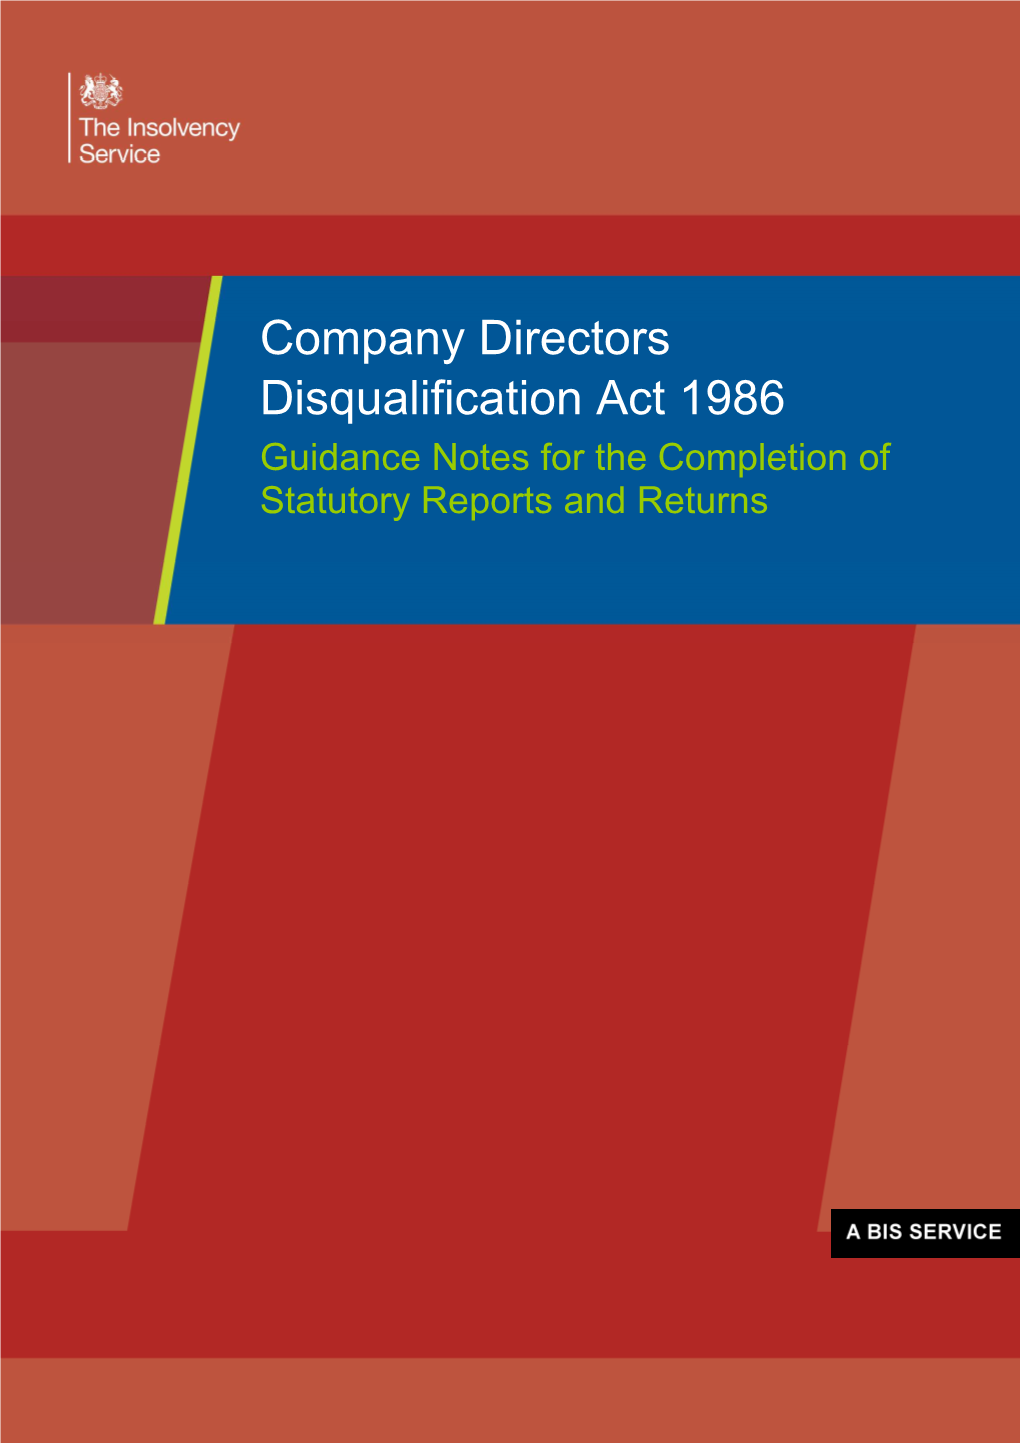 Company Directors Disqualification Act 1986 Guidance Notes for the Completion of Statutory Reports and Returns